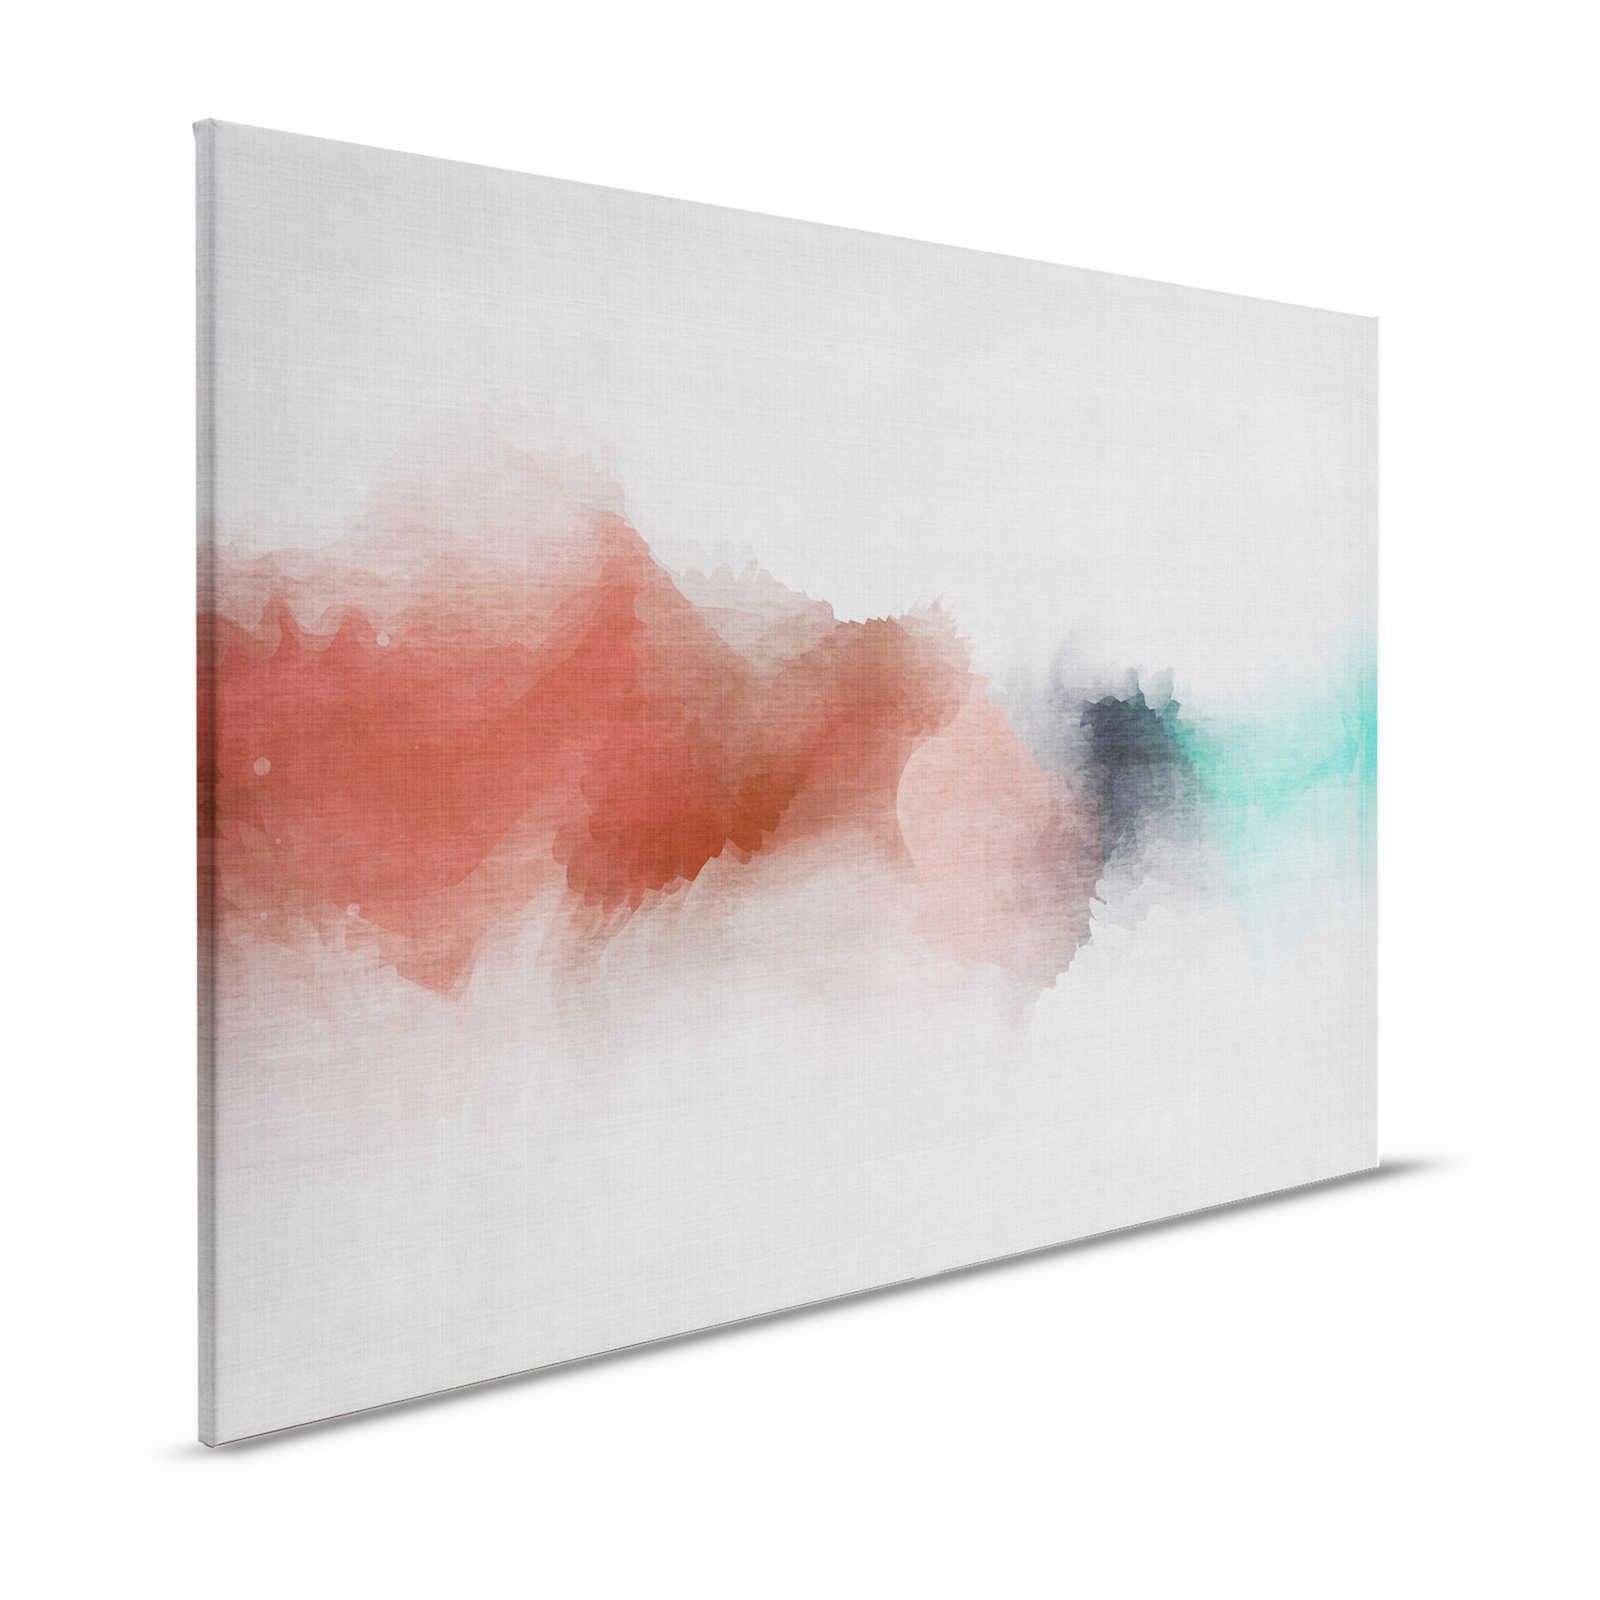 Daydream 2 - Canvas painting in natural linen look with watercolour style colour stain - 1.20 m x 0.80 m
